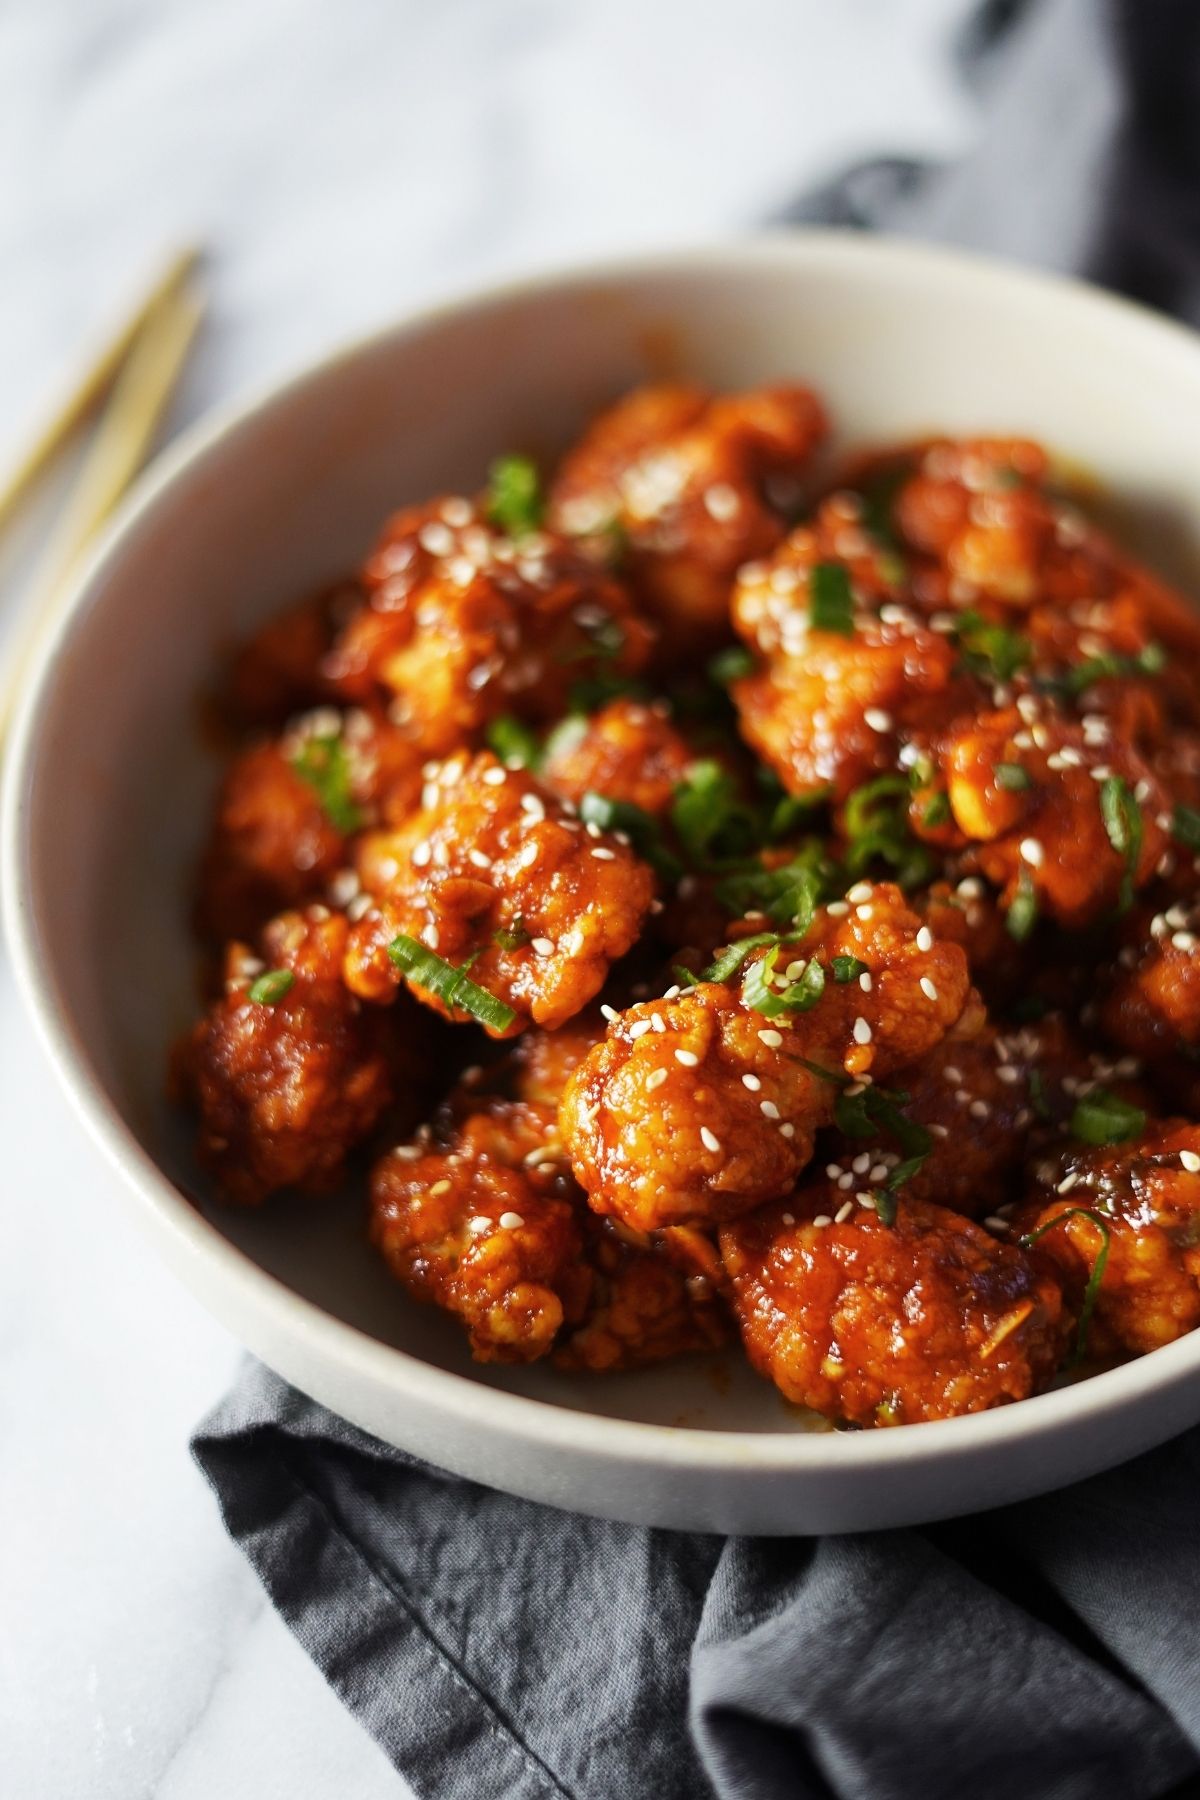 A bowl of fried chicken with gochujang sauce.